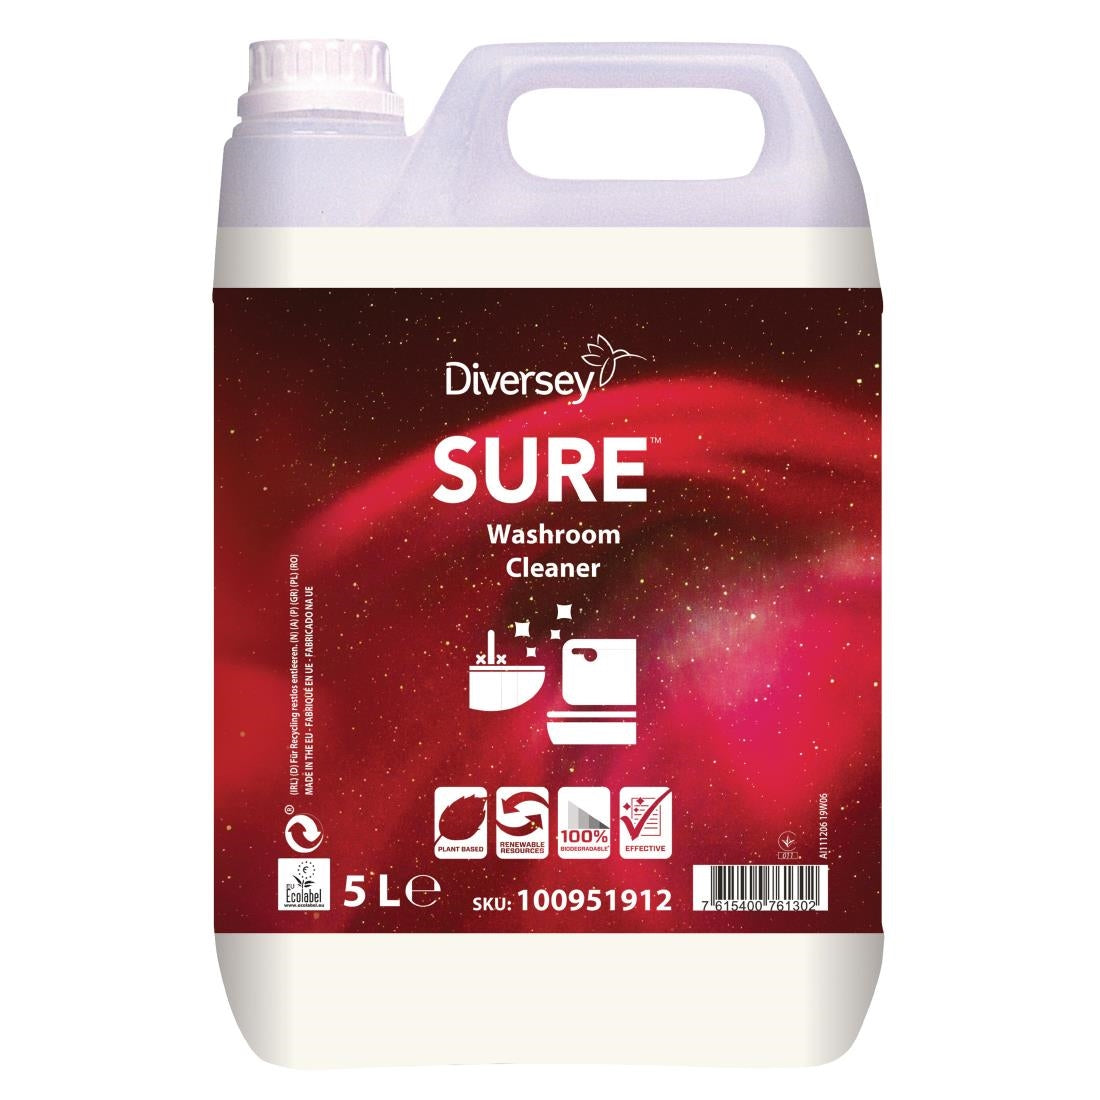 CX842 SURE Washroom Cleaner Concentrate 5Ltr JD Catering Equipment Solutions Ltd